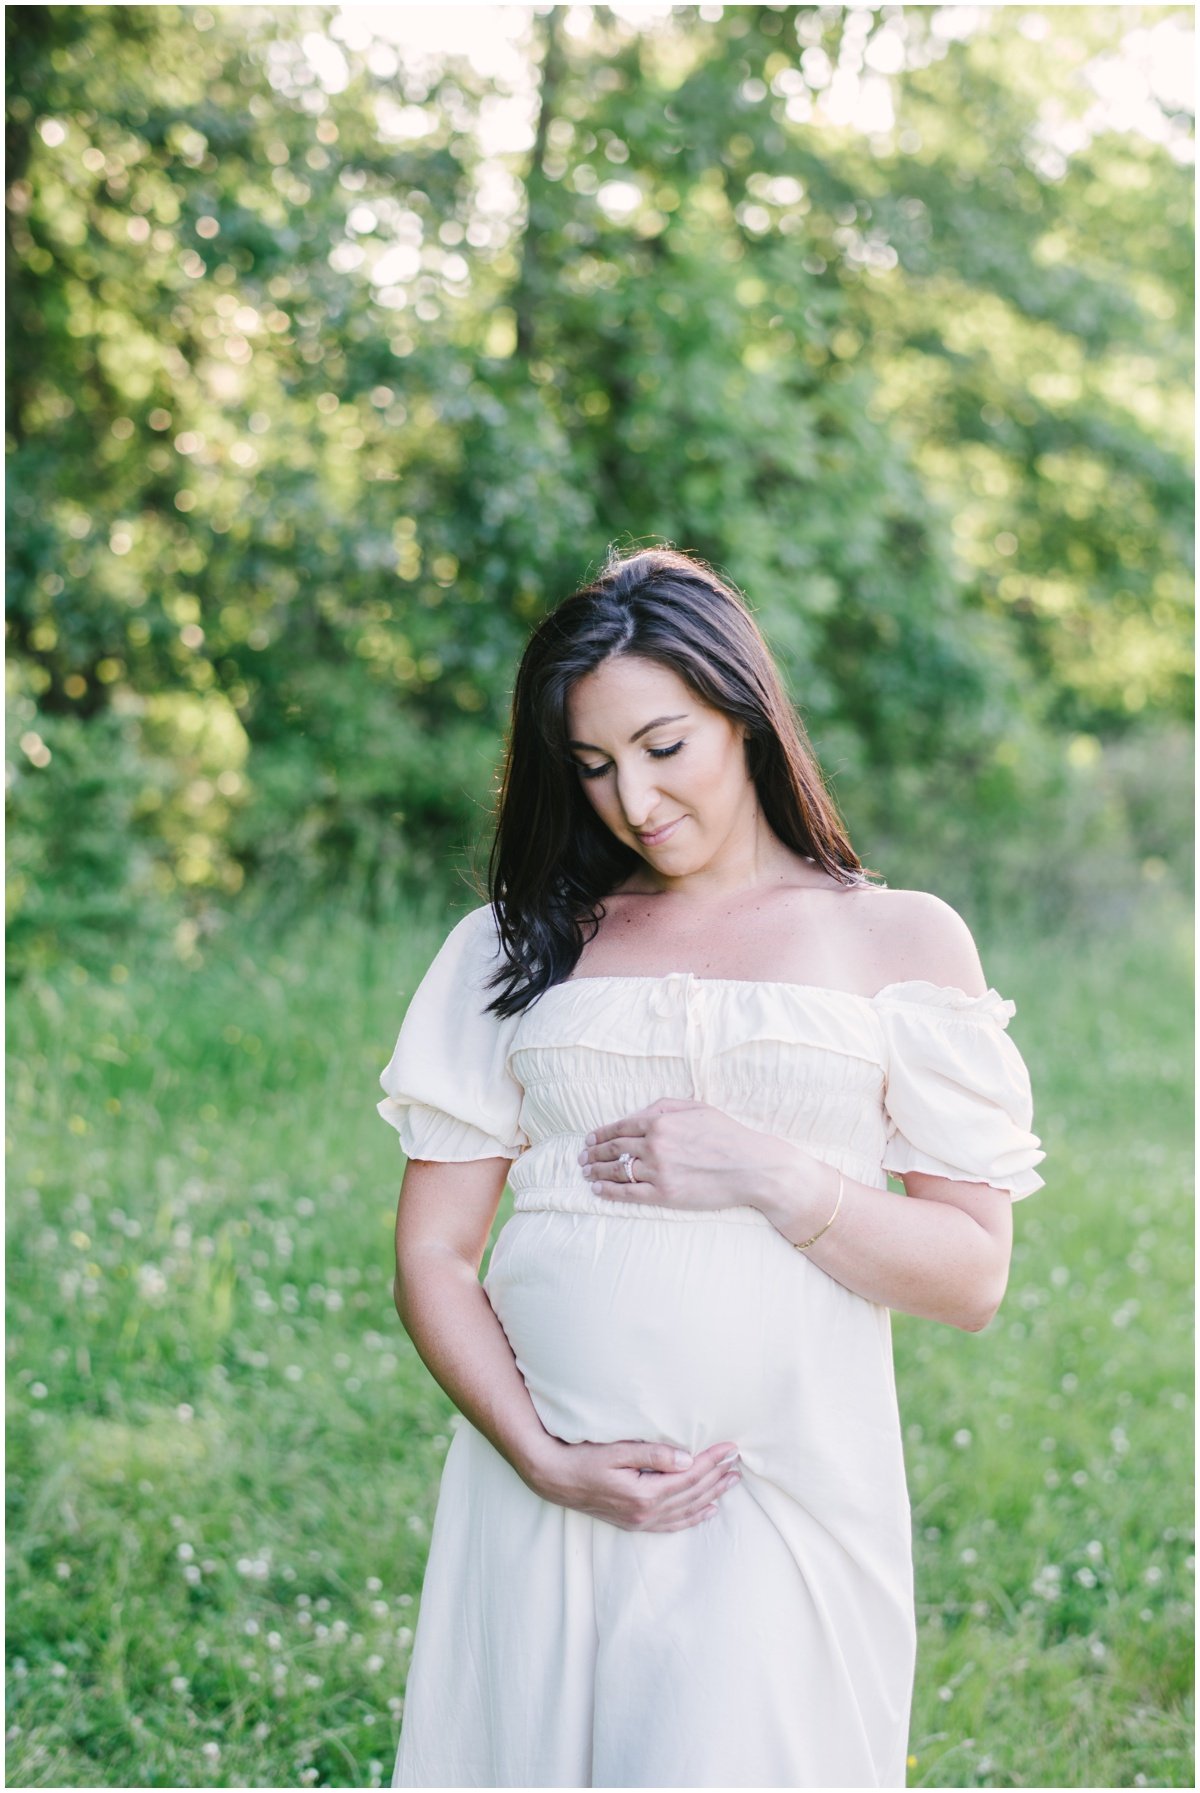 Woman wearing white flowy dress and cradling bump during maternity session | NKB Photo